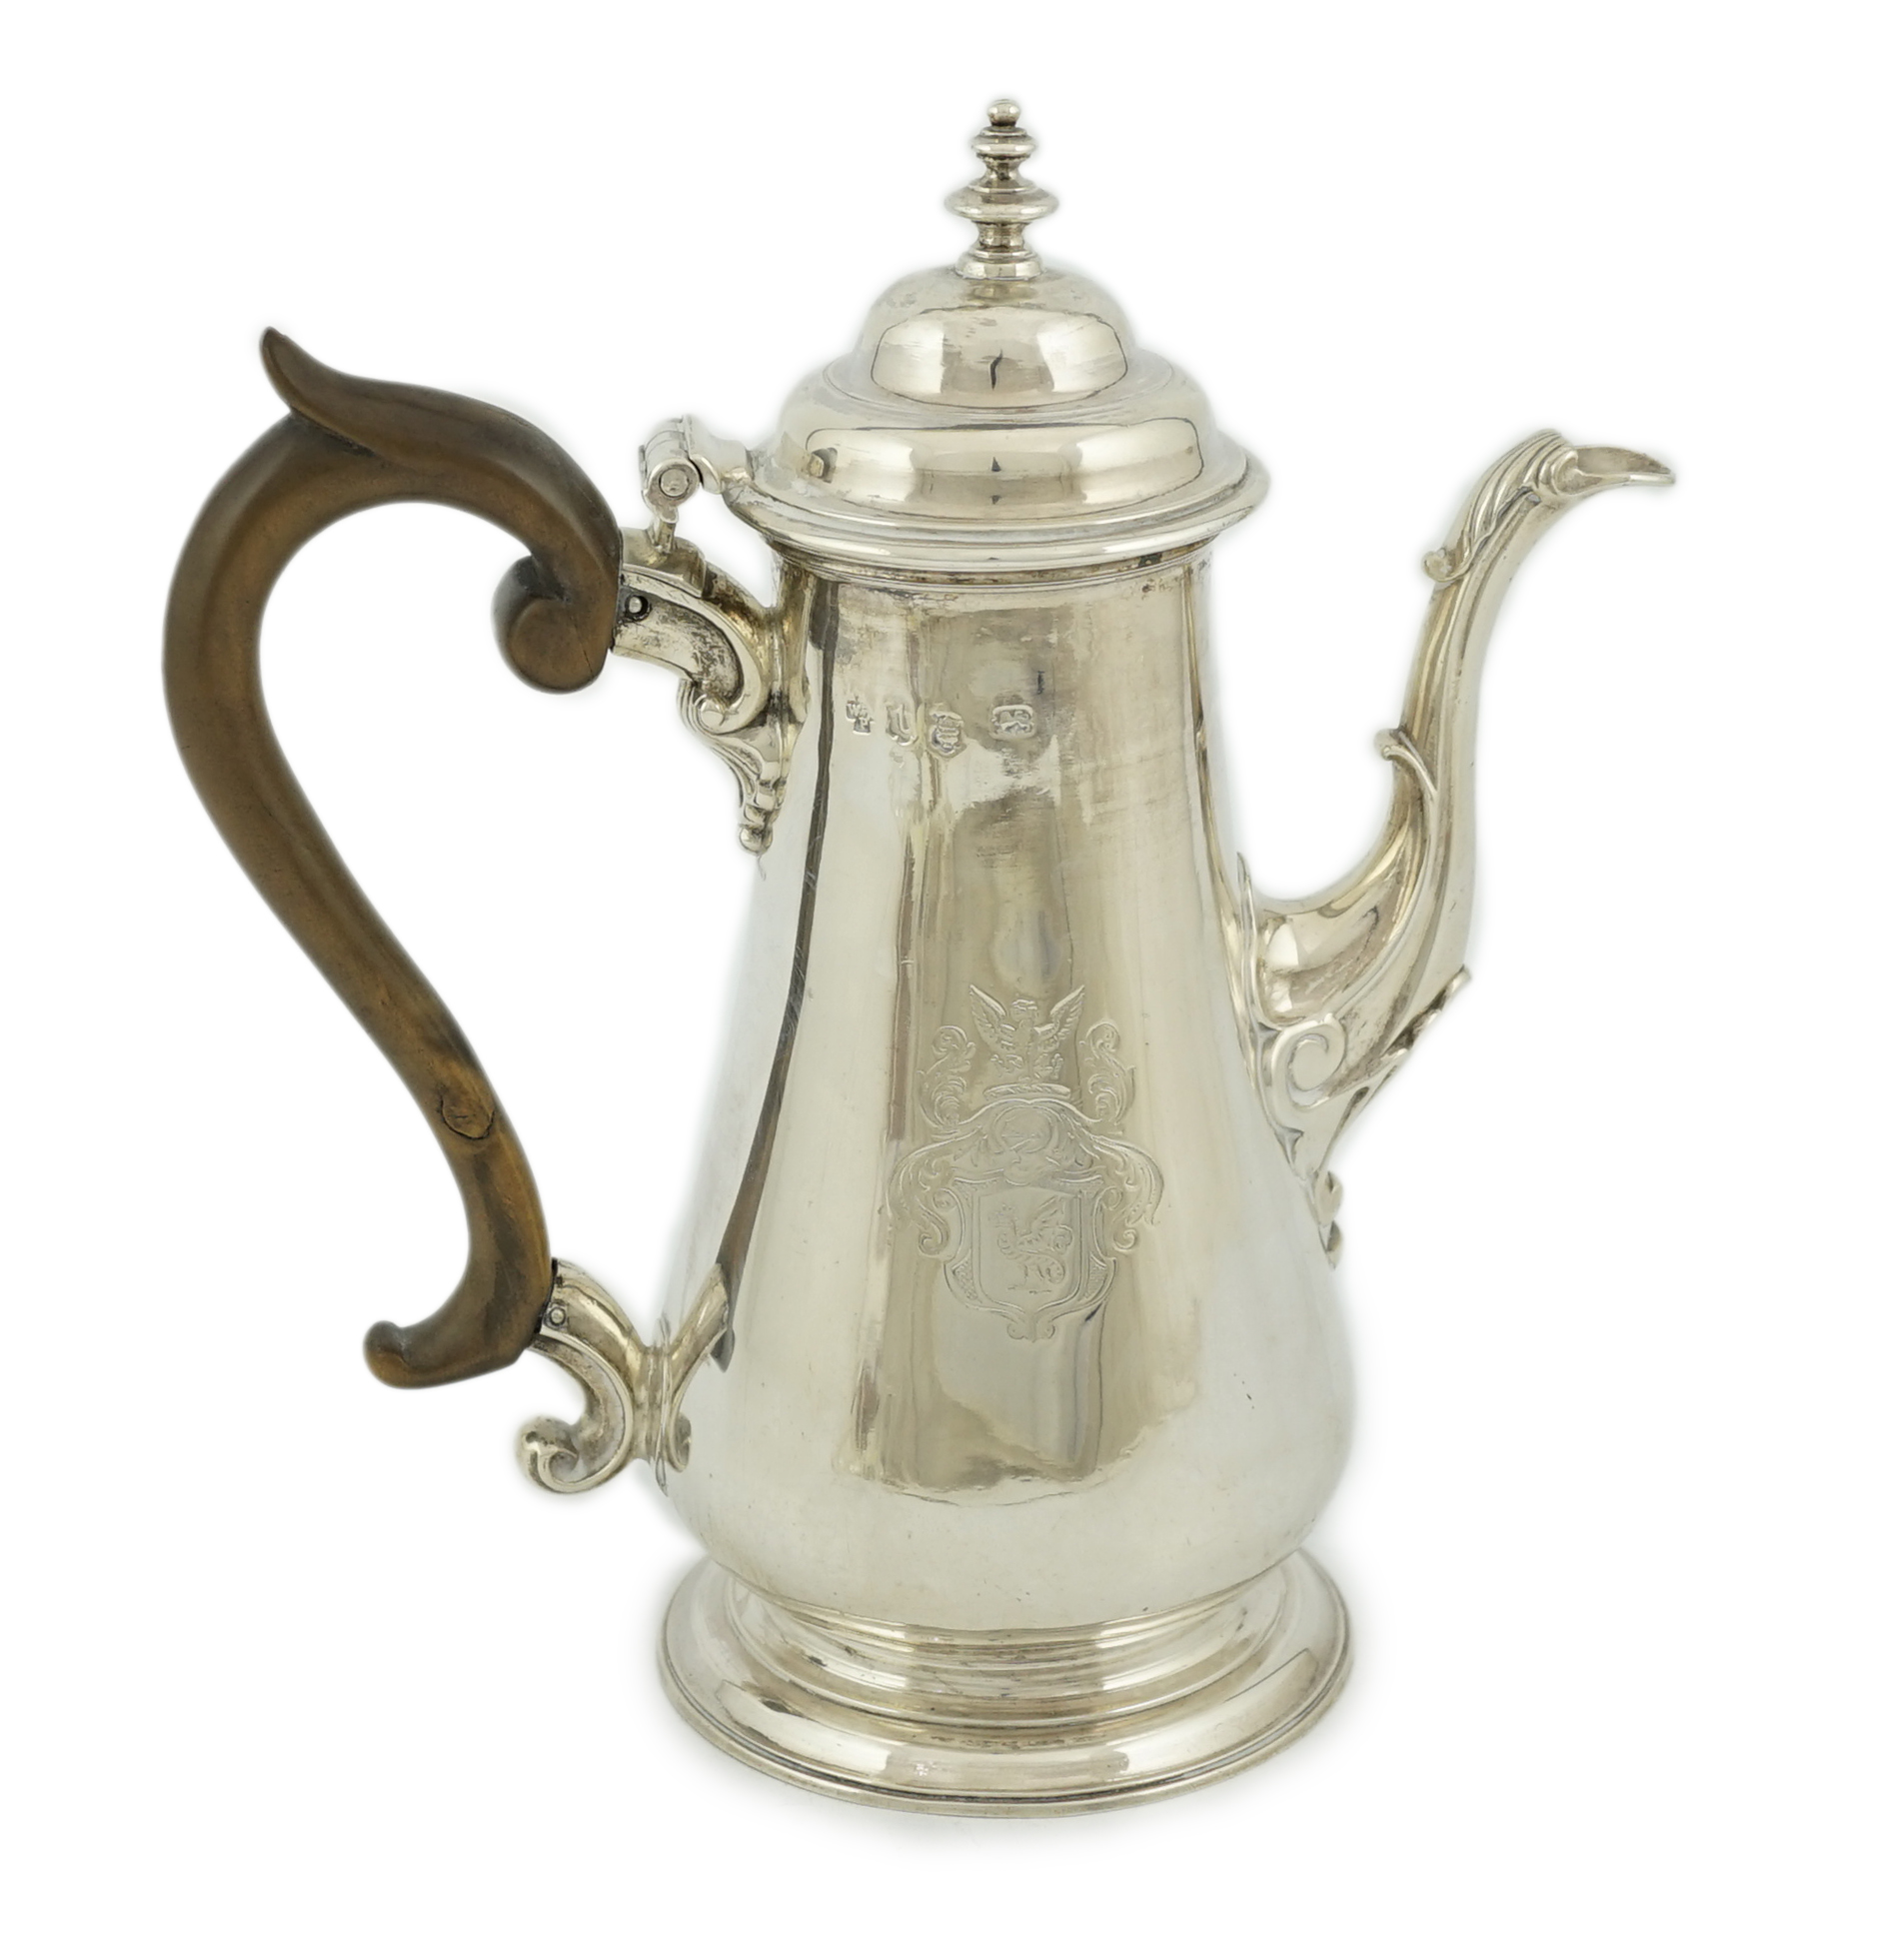 A George II silver coffee pot, possibly by William & Robert Peaston